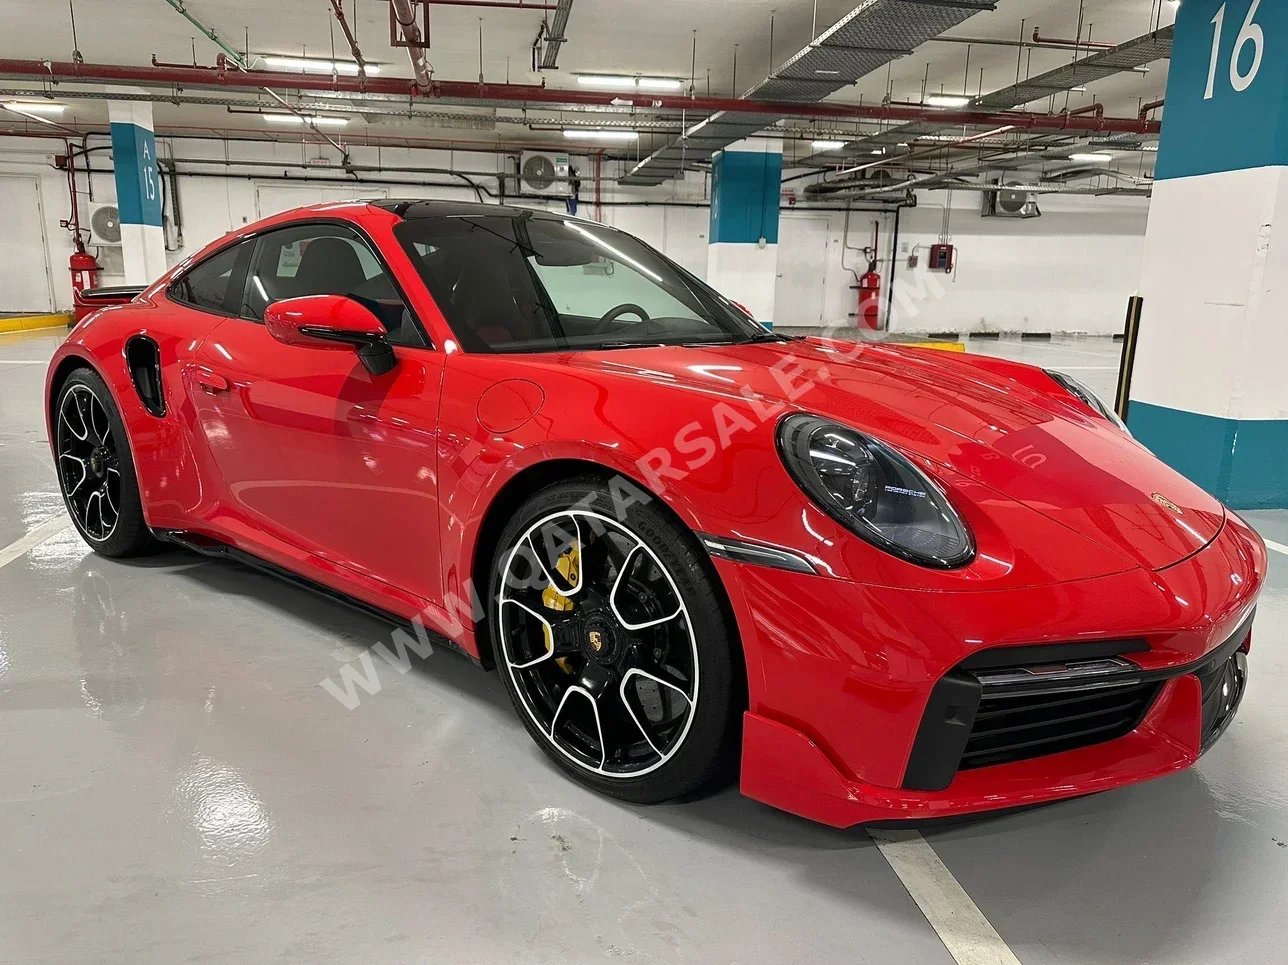 Porsche  911  Turbo S  2023  Automatic  8,000 Km  6 Cylinder  Rear Wheel Drive (RWD)  Coupe / Sport  Red  With Warranty